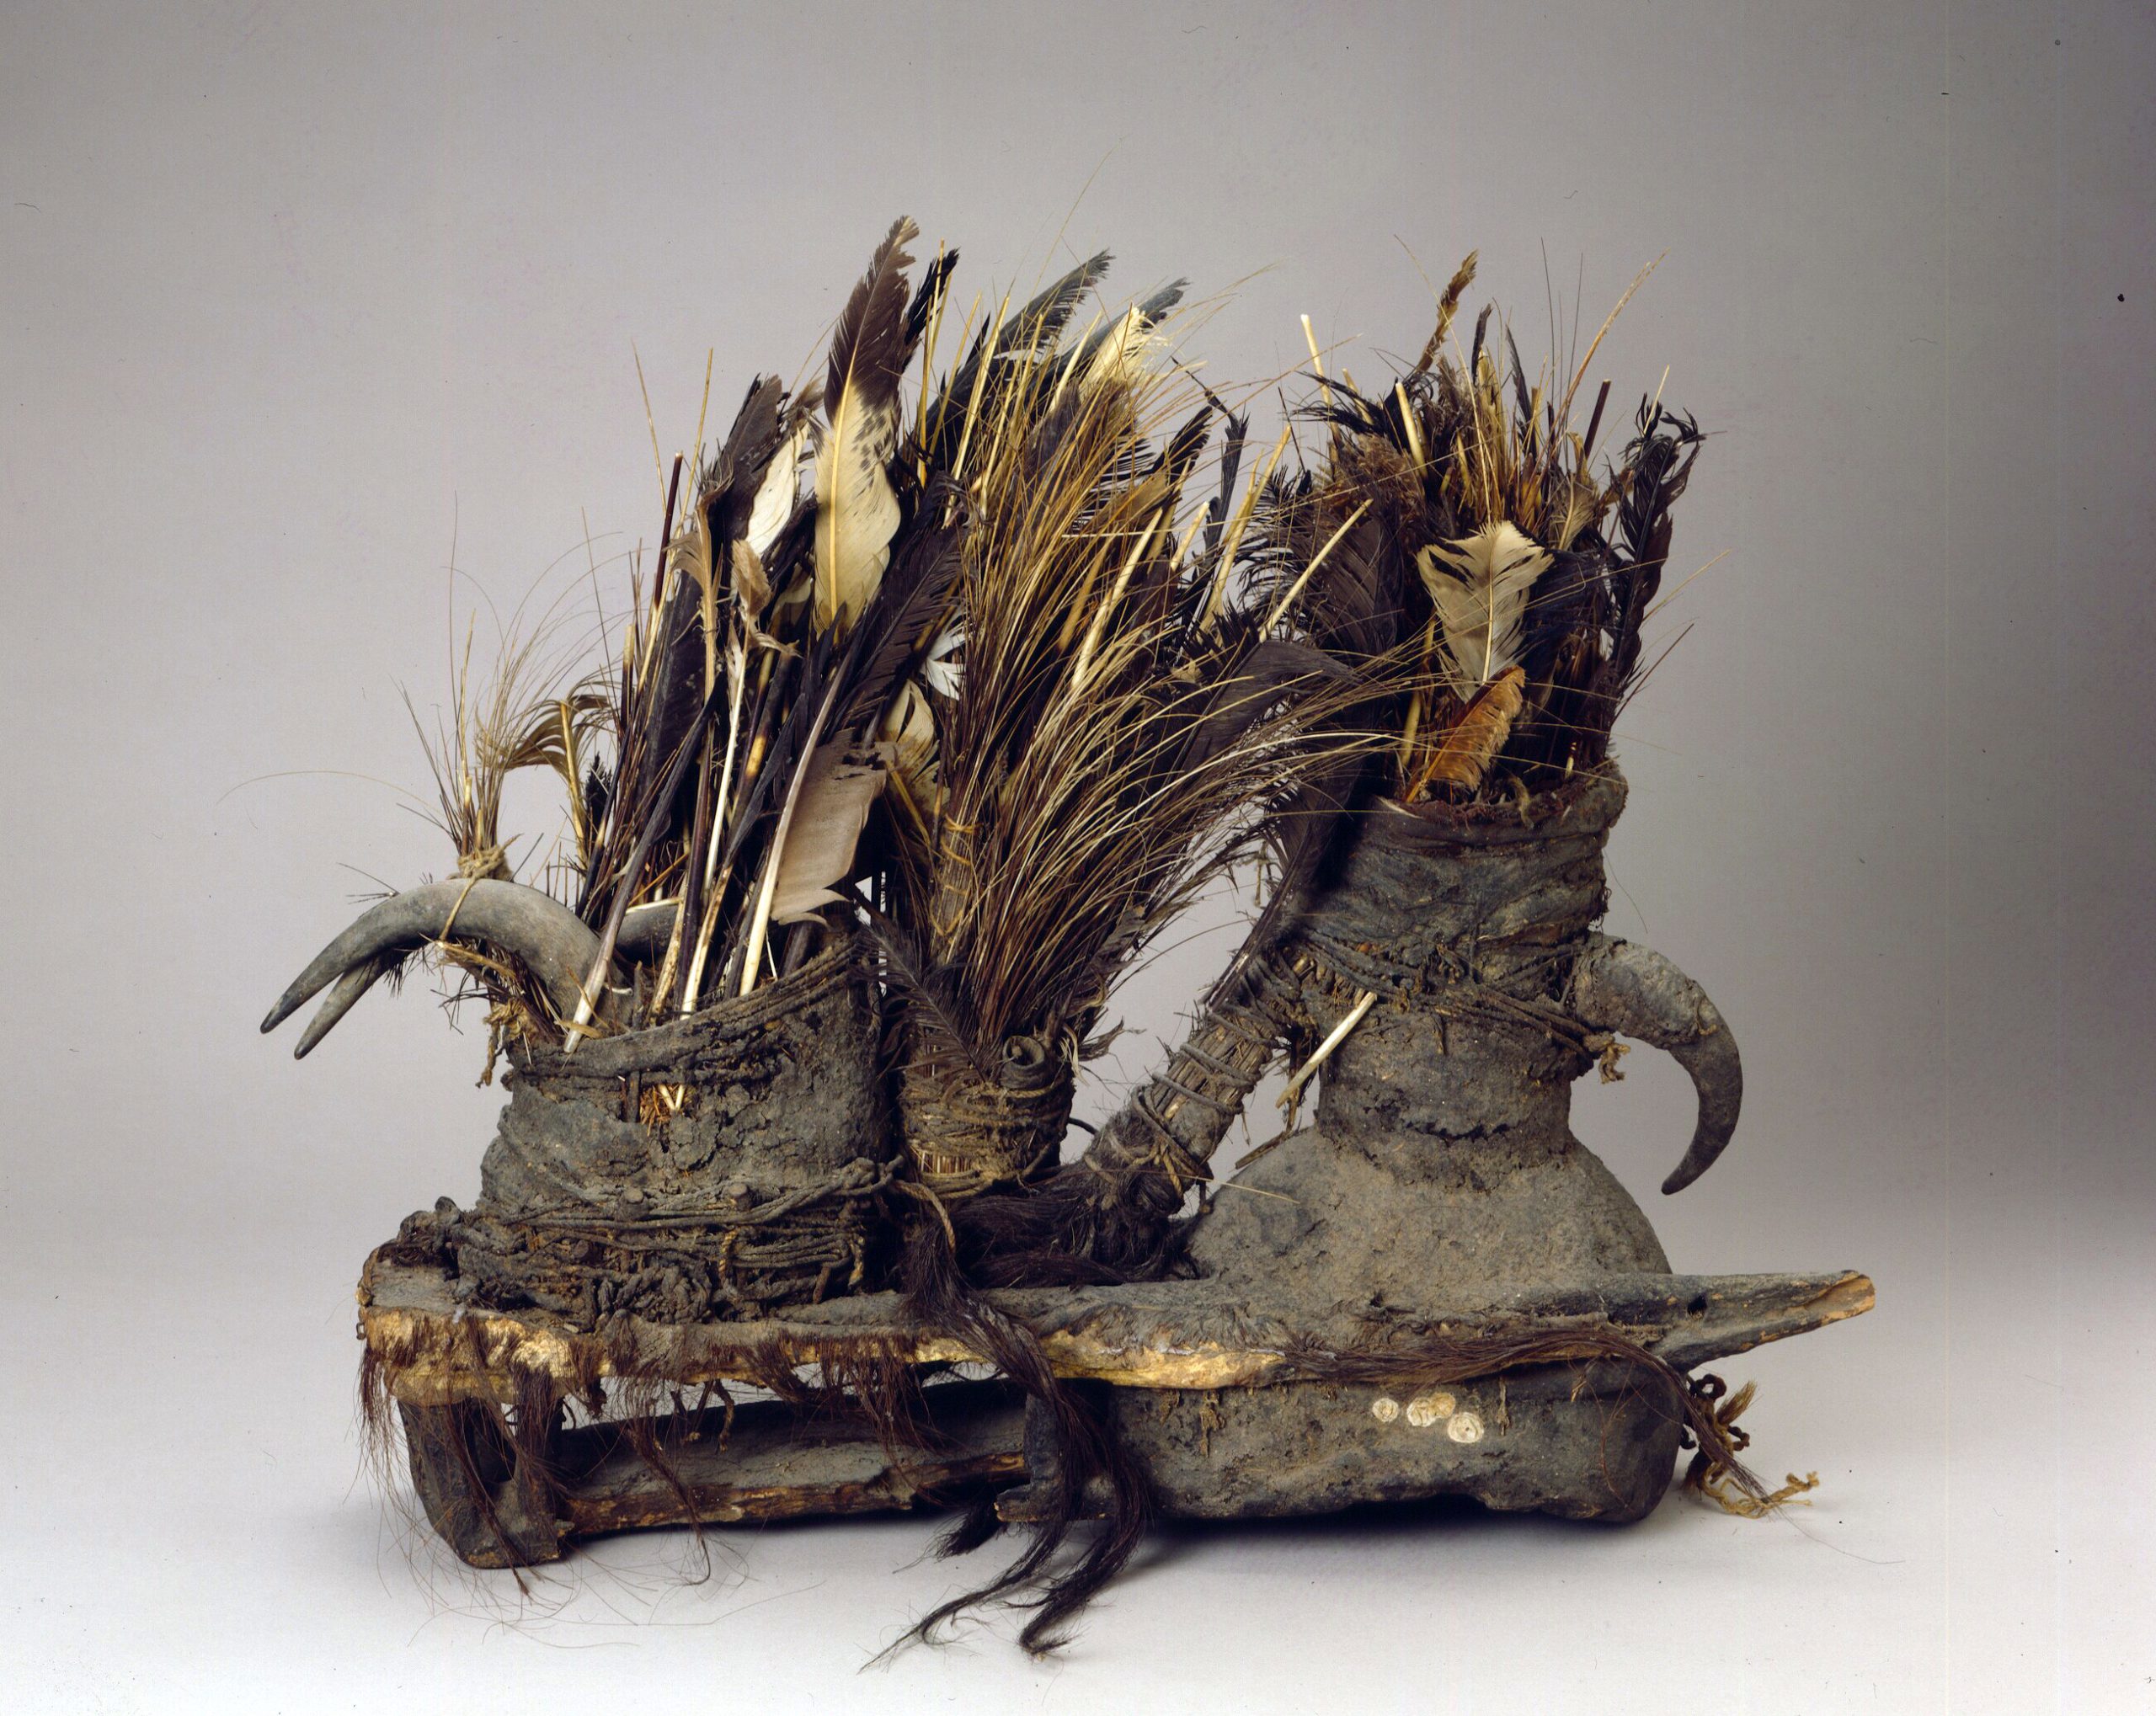 A headdress made of feathers, quills, horns, and other natural materials